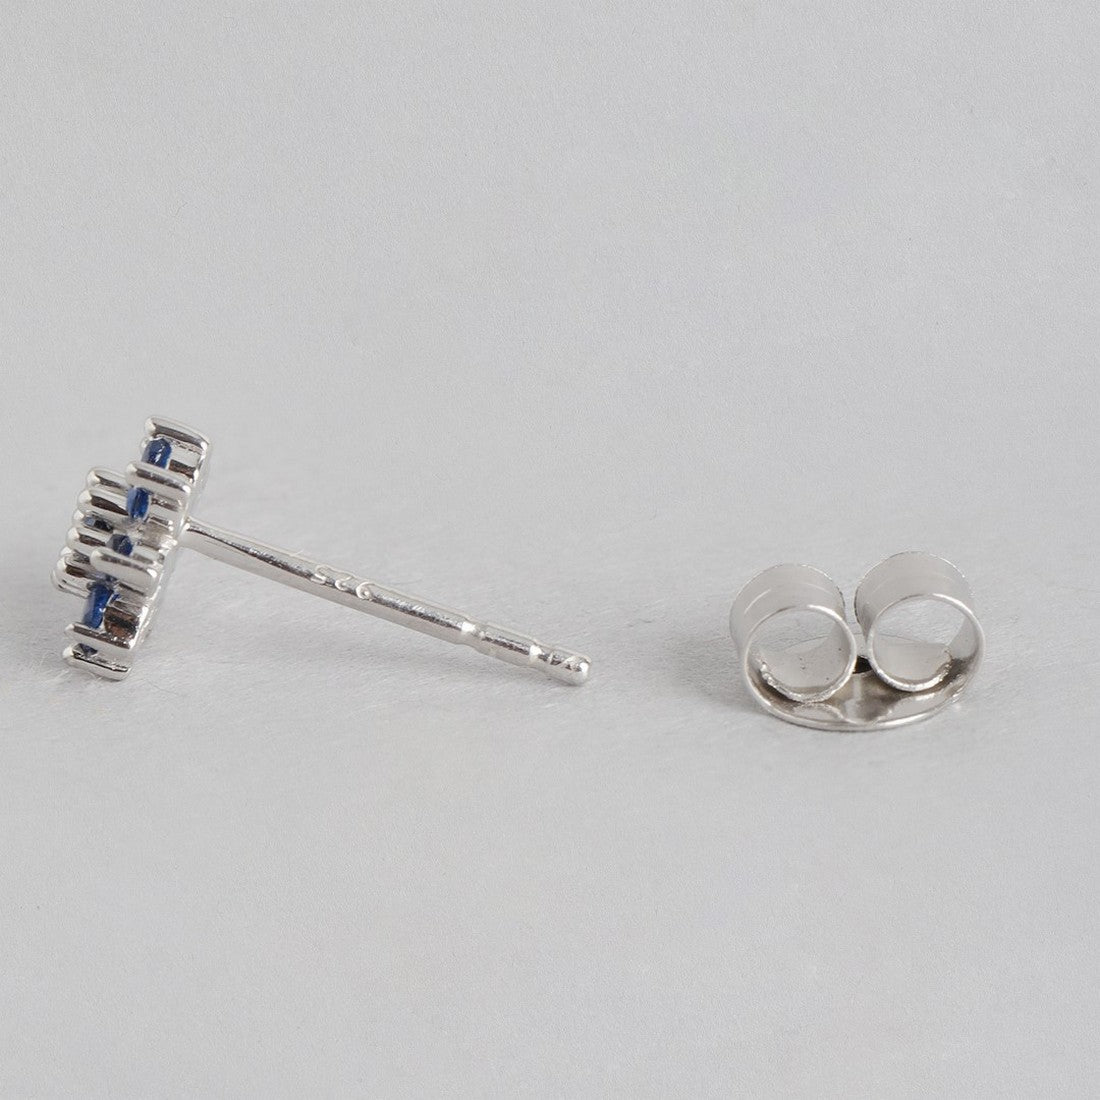 Blue Stones Star Rhodium Plated 925 Sterling Silver Stud